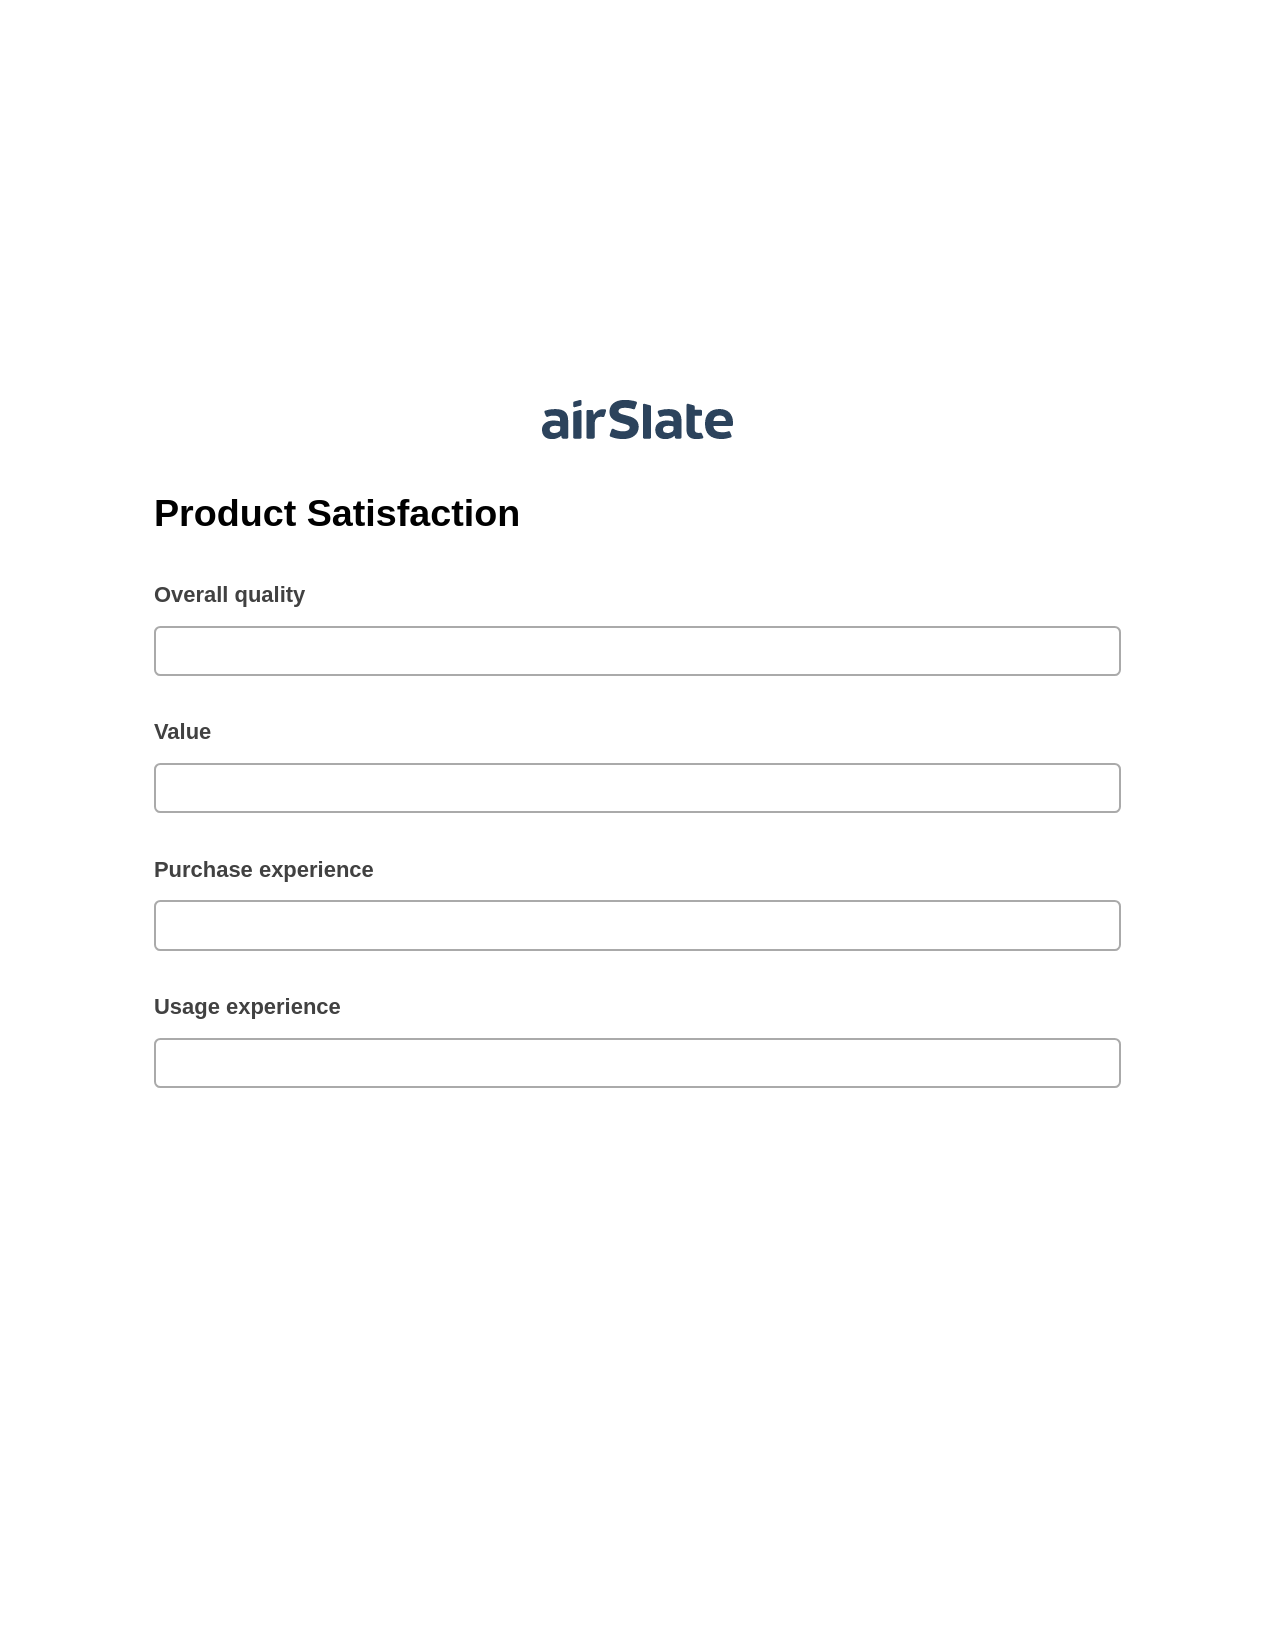 Product Satisfaction Pre-fill from CSV File Bot, Create QuickBooks invoice Bot, Export to MySQL Bot